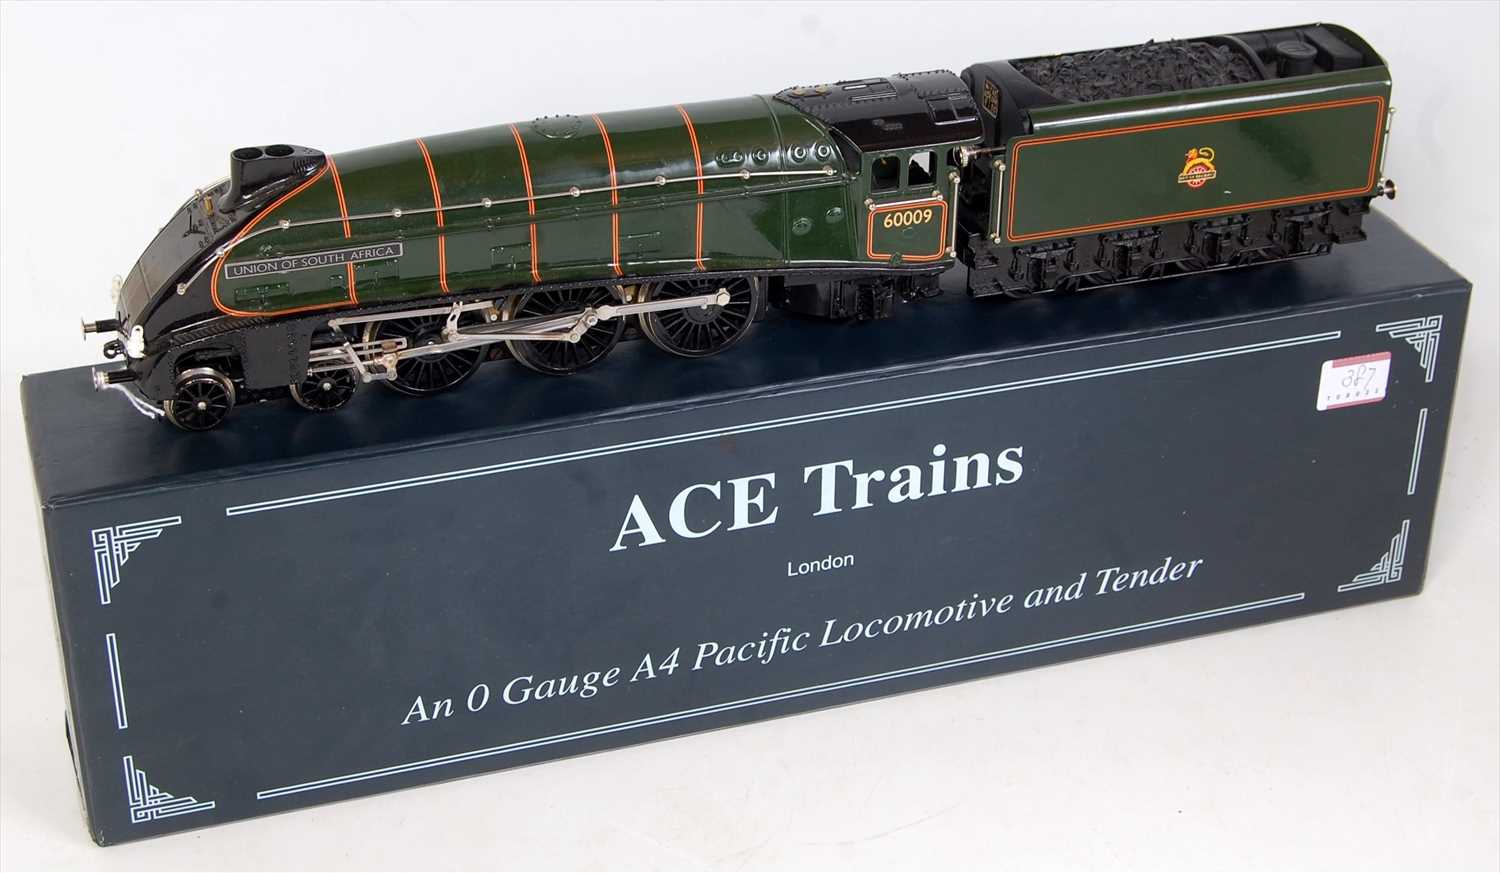 Lot 387 - ACE Trains BR lined green class A4 engine and...